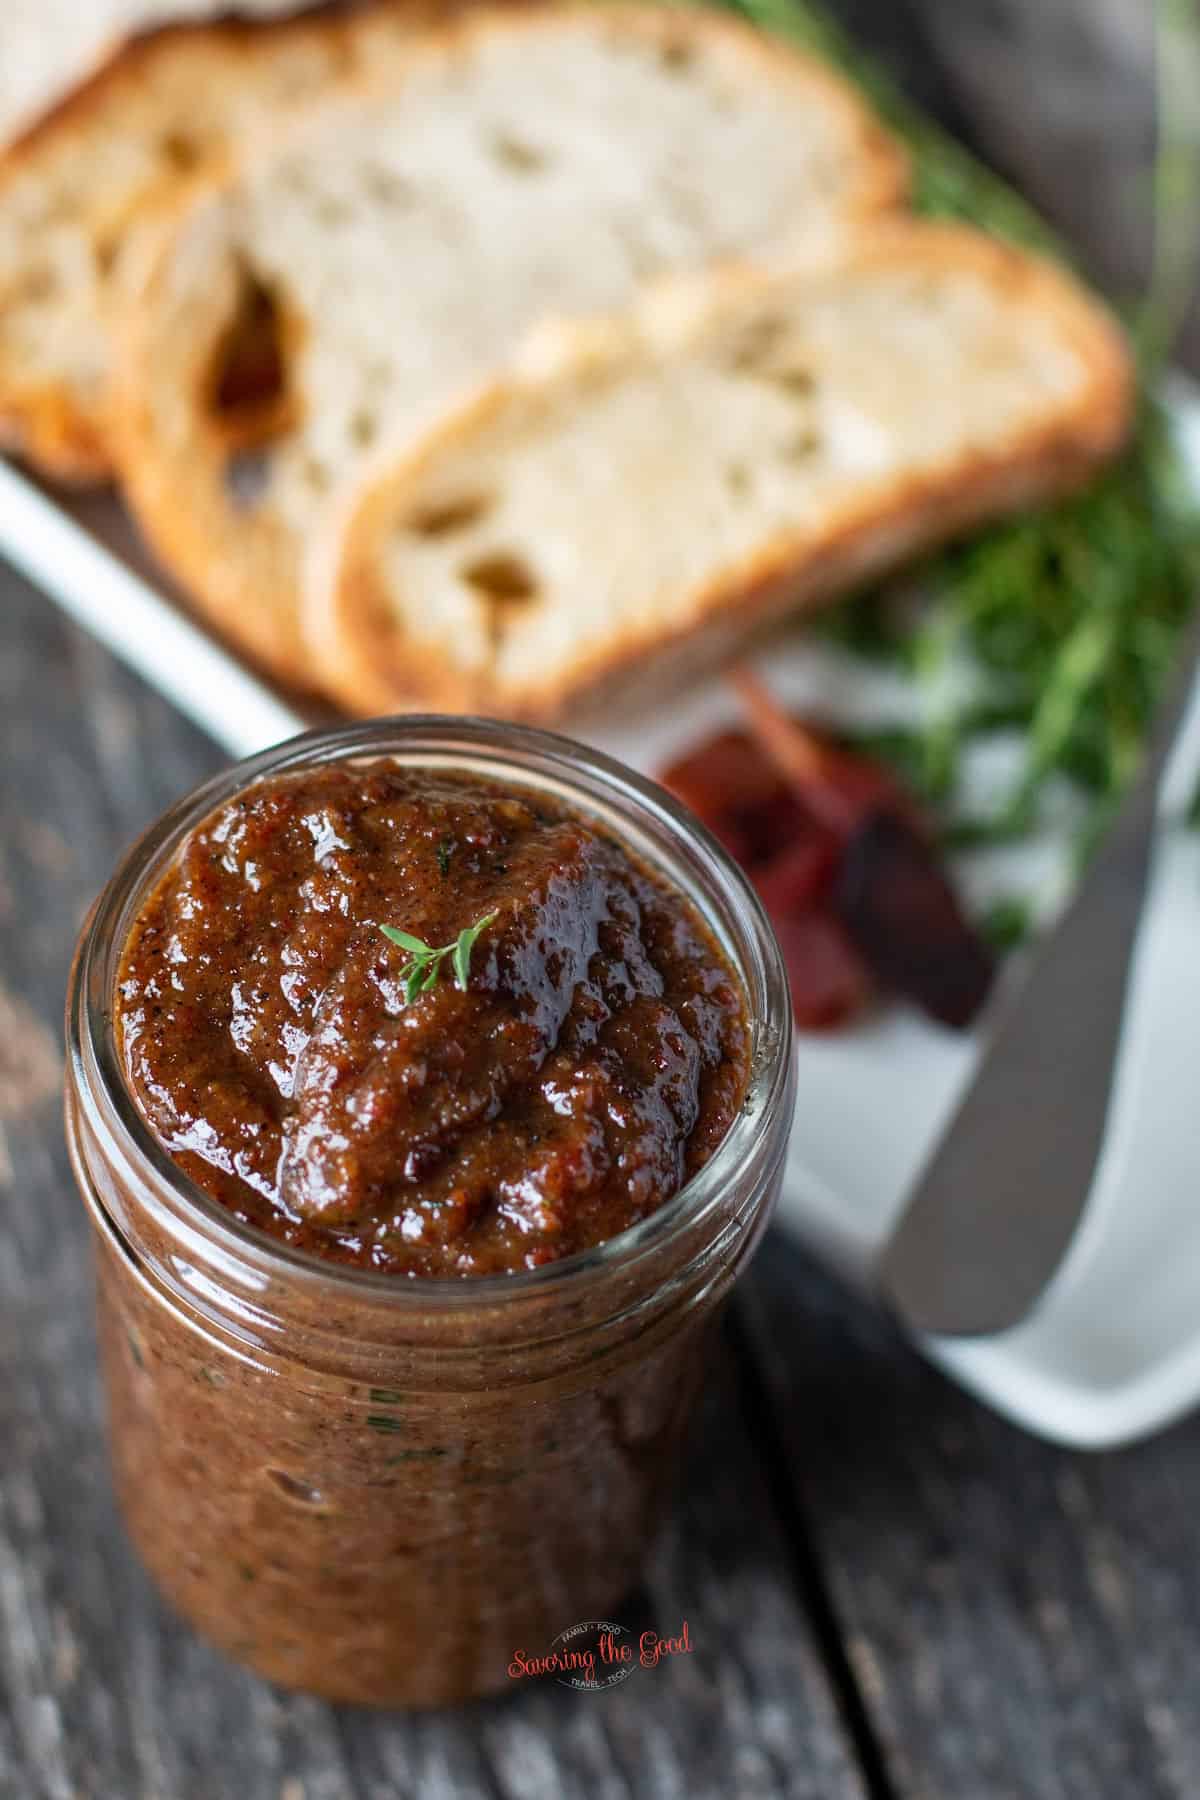 bacon jam with thyme garnish, vertical image